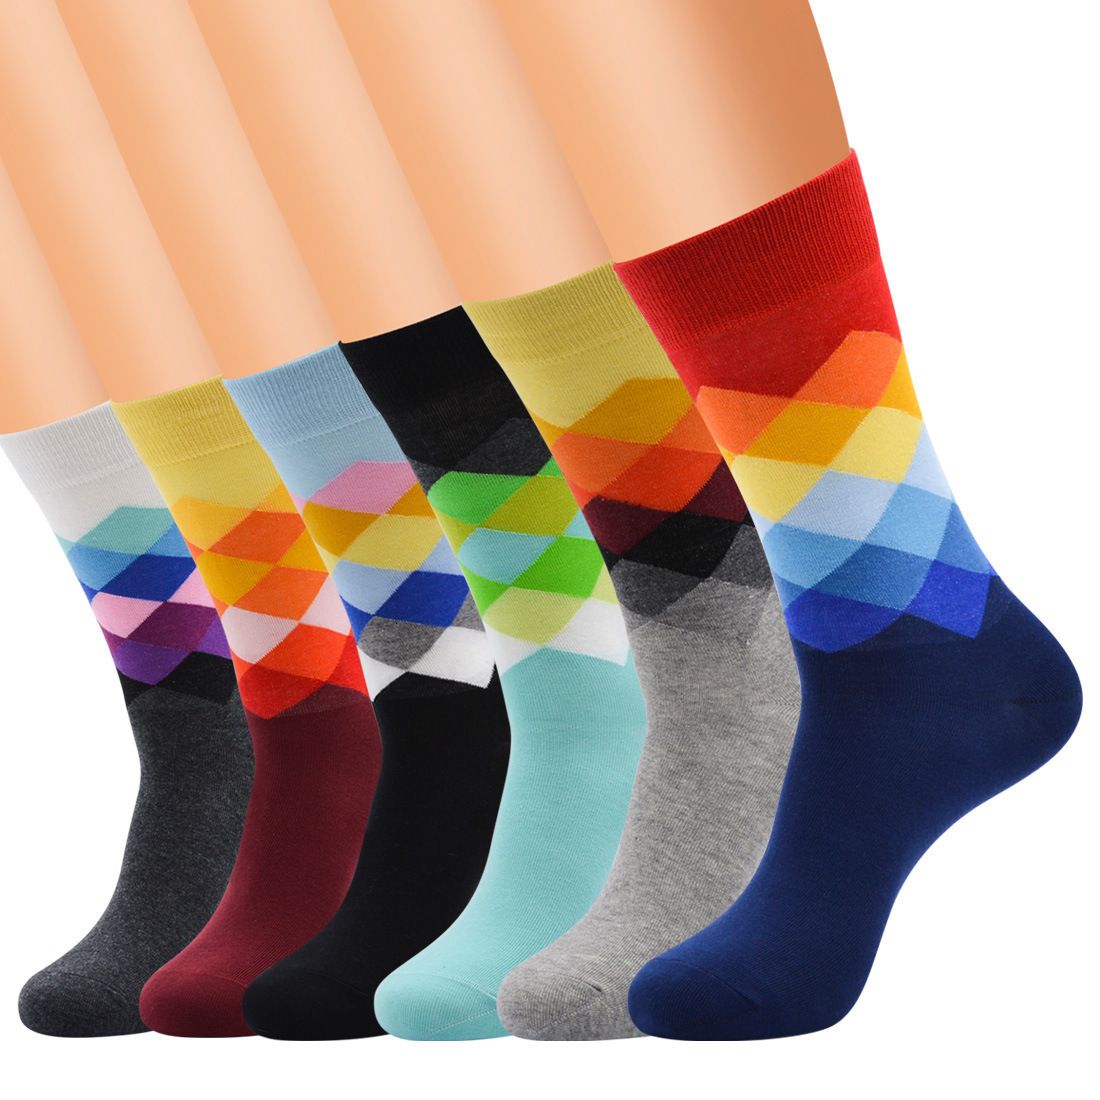 Comfortable Compression Socks Colorful For Man Male Geometry Calcetines Art